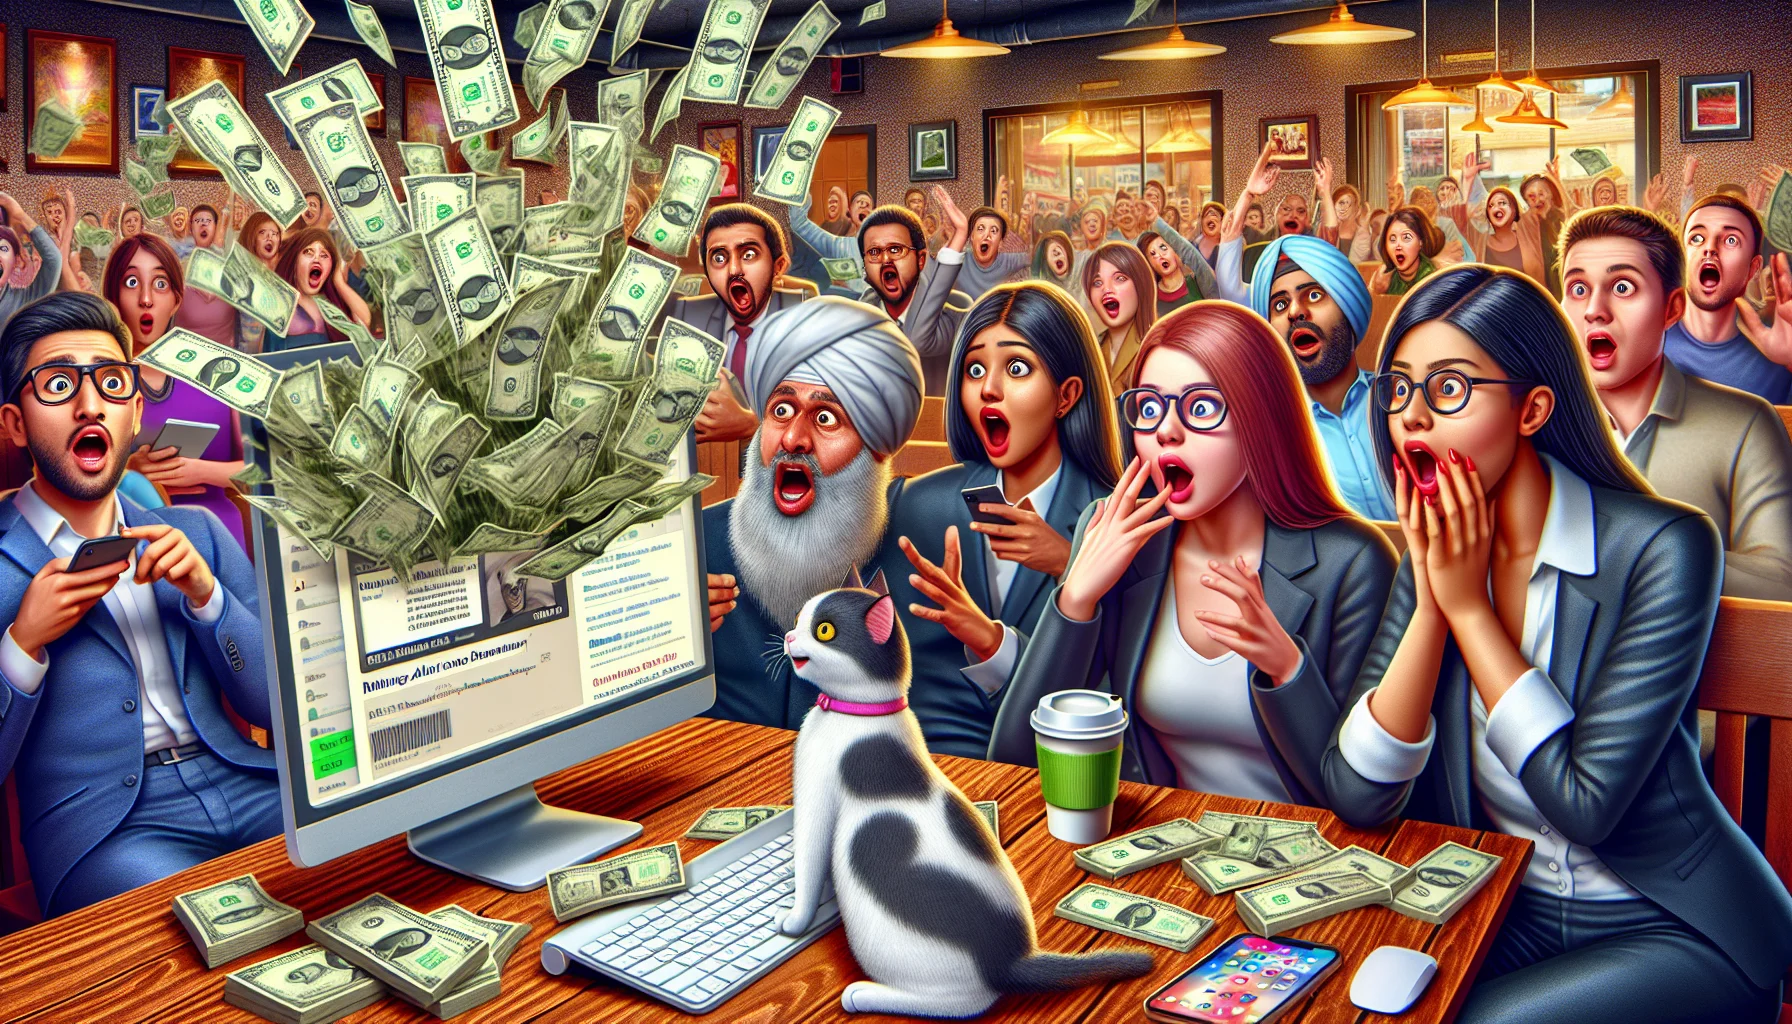 An amusing realistic scene showcasing an unidentified online affiliate program related to making money. The scene depicts animated dollar bills flying from a computer screen in a crowded coffee shop. A group of people, consisting of two South Asian women and a Middle-Eastern man, are seated around the computer with wide-eyed reactions and open mouths, stunned by the overflowing digital wealth. Additional hilarious elements, such as a cat chasing a digital dollar, infuse humor into the scene.